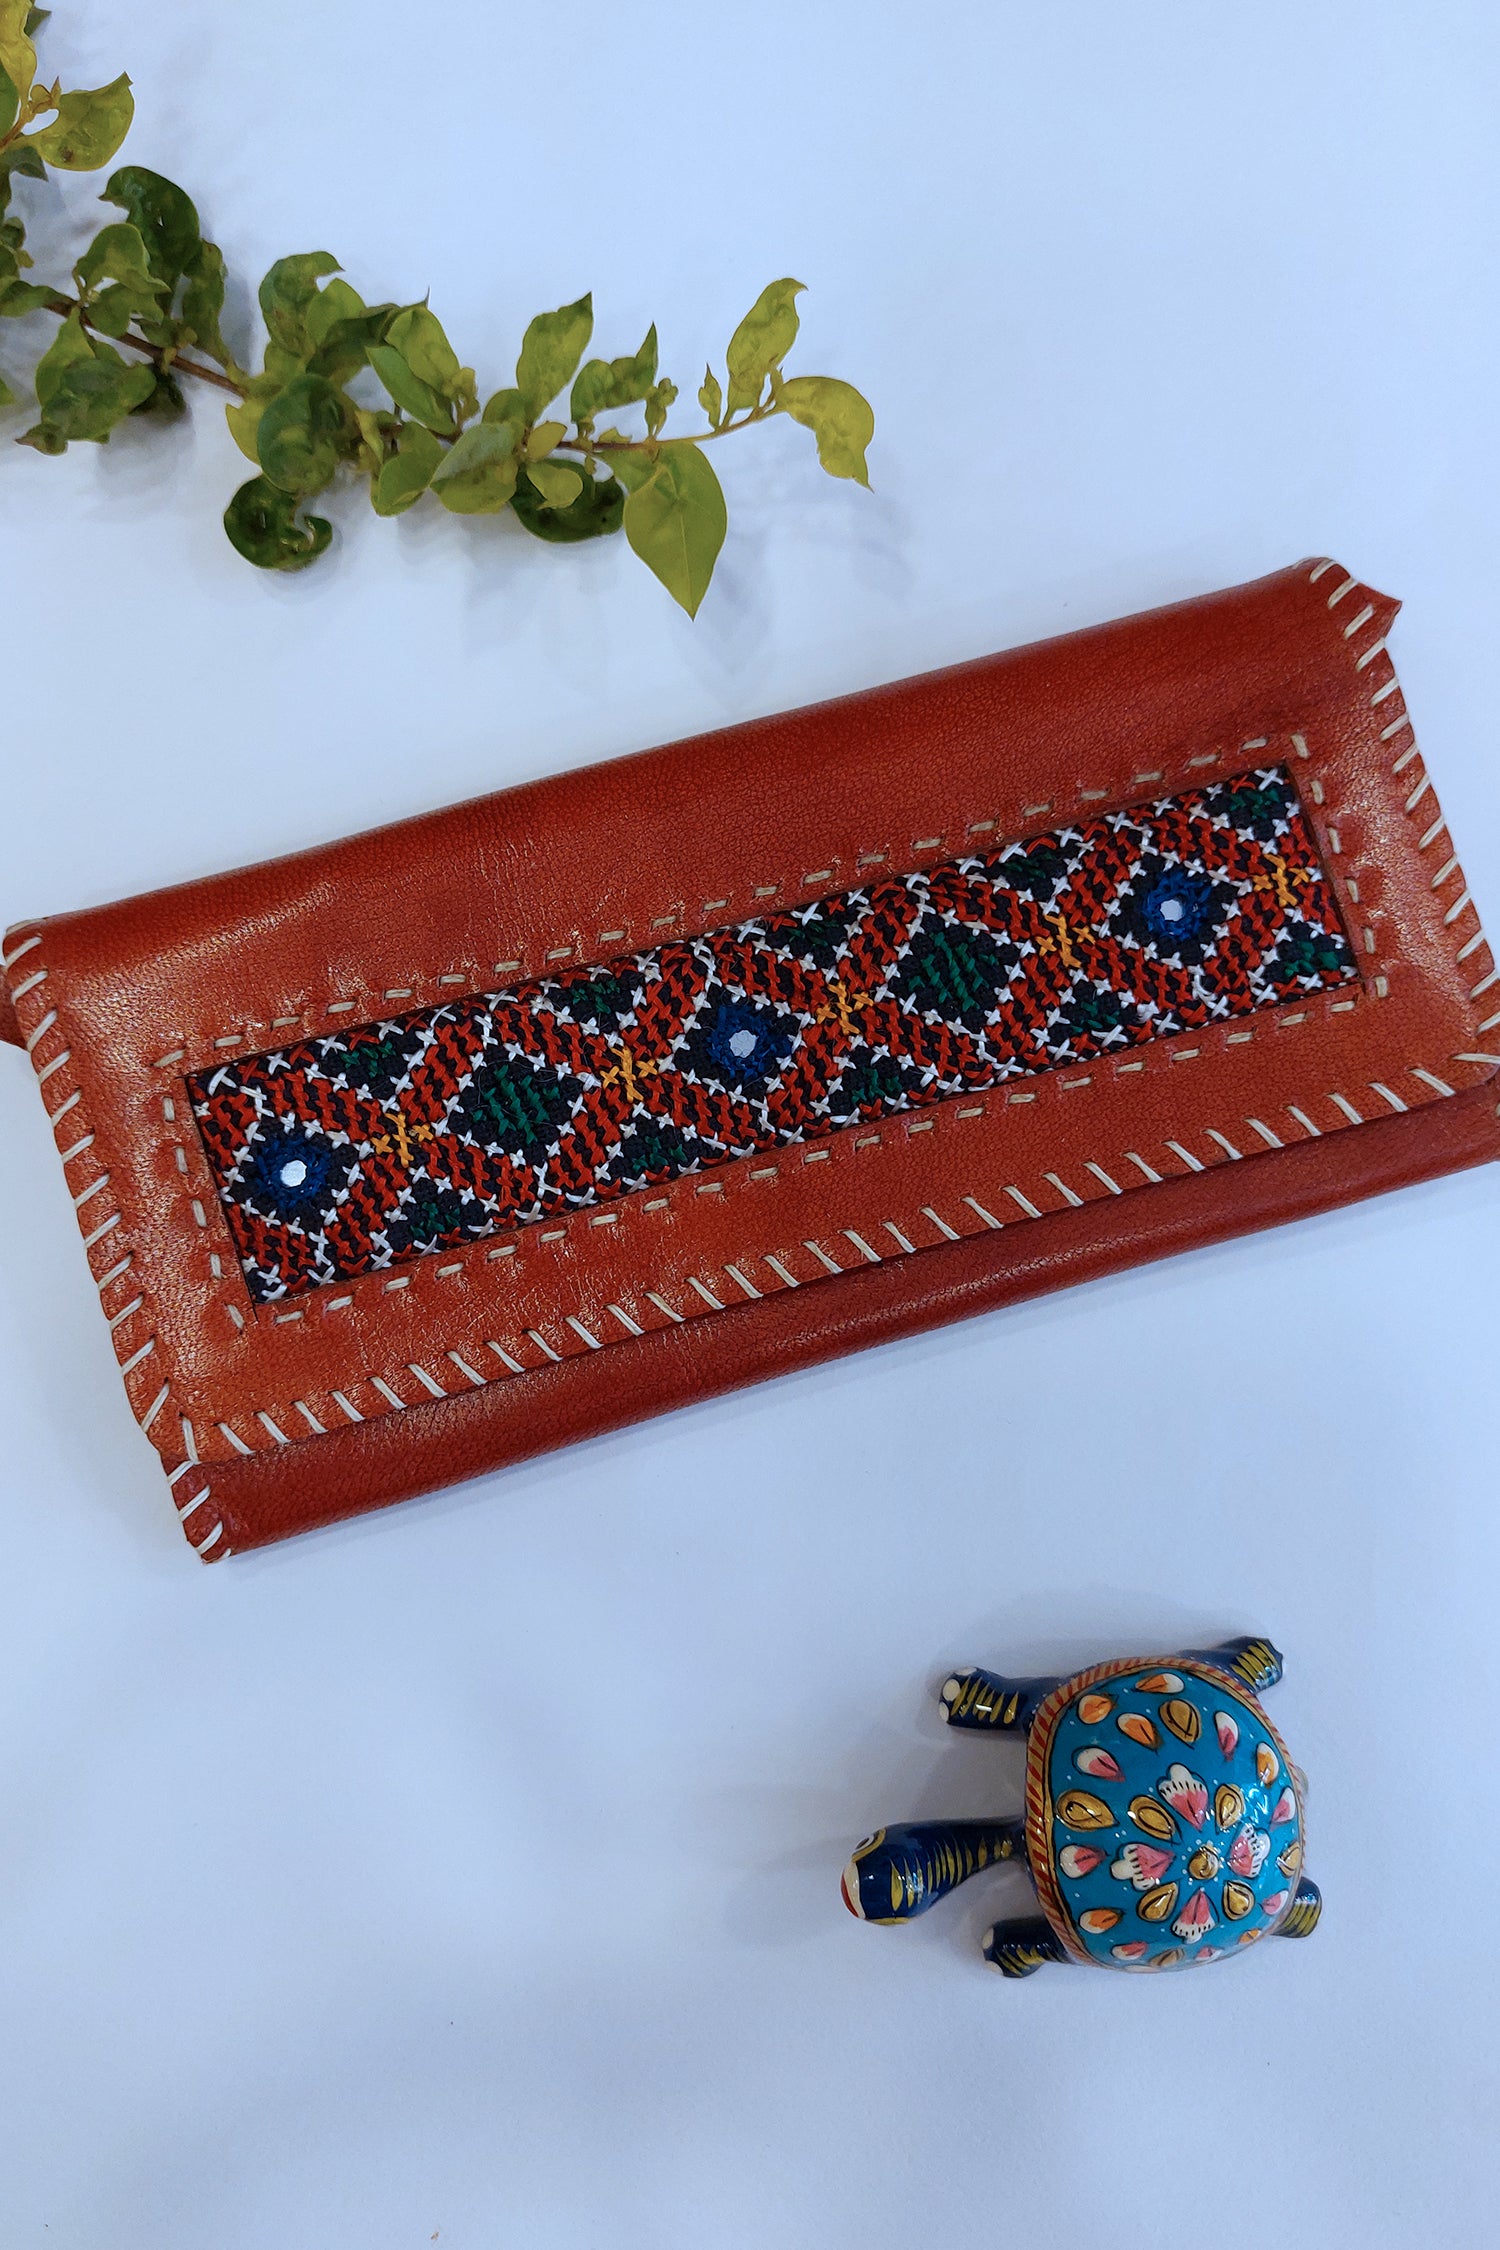 Handcrafted Genuine Leather Wallet with Jat Embroidery and Detachable Sling Sling Bag Handcrafted Genuine Leather Wallet with Jat Embroidery and Detachable Sling Sling Bag Handcrafted Genuine Leather Wallet with Jat Embroidery and Detachable Sling Sling Bag 